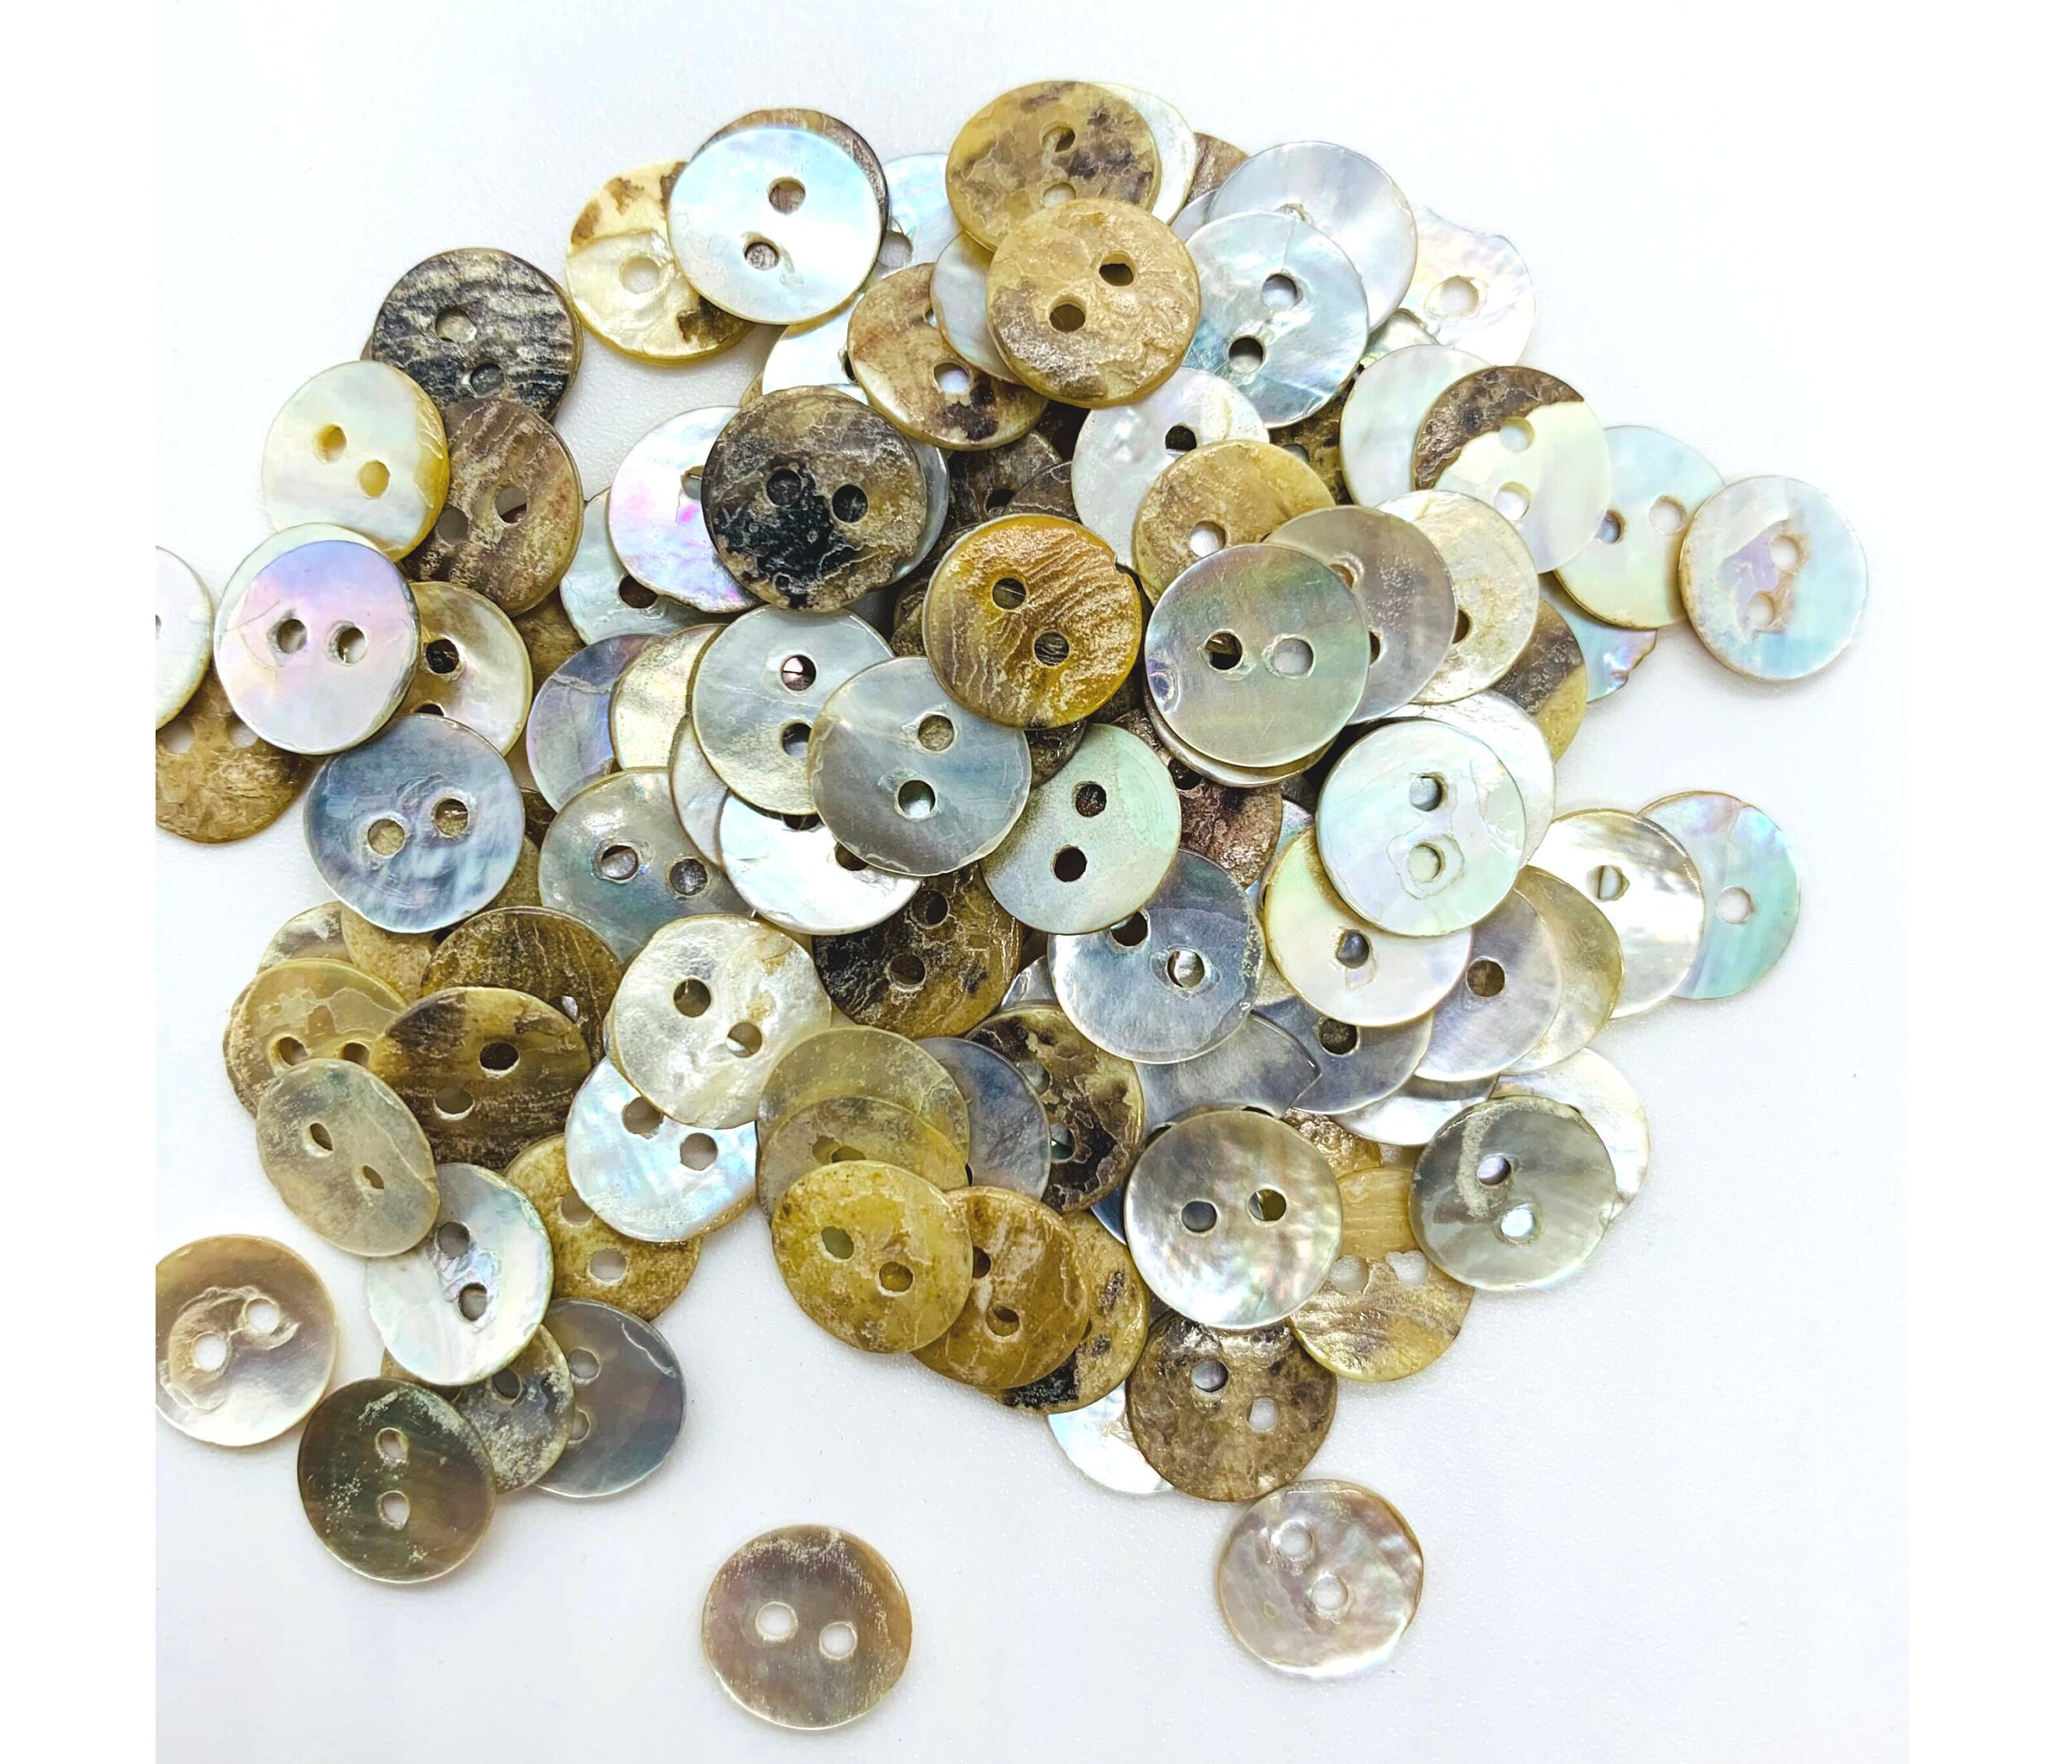 Beige Pearl Buttons 10mm Round Sewing Resin Pearl Buttons with Hole Apply  for DIY Craft Sewing Shirt Skirt Dress and Wedding Gown(50Pcs)